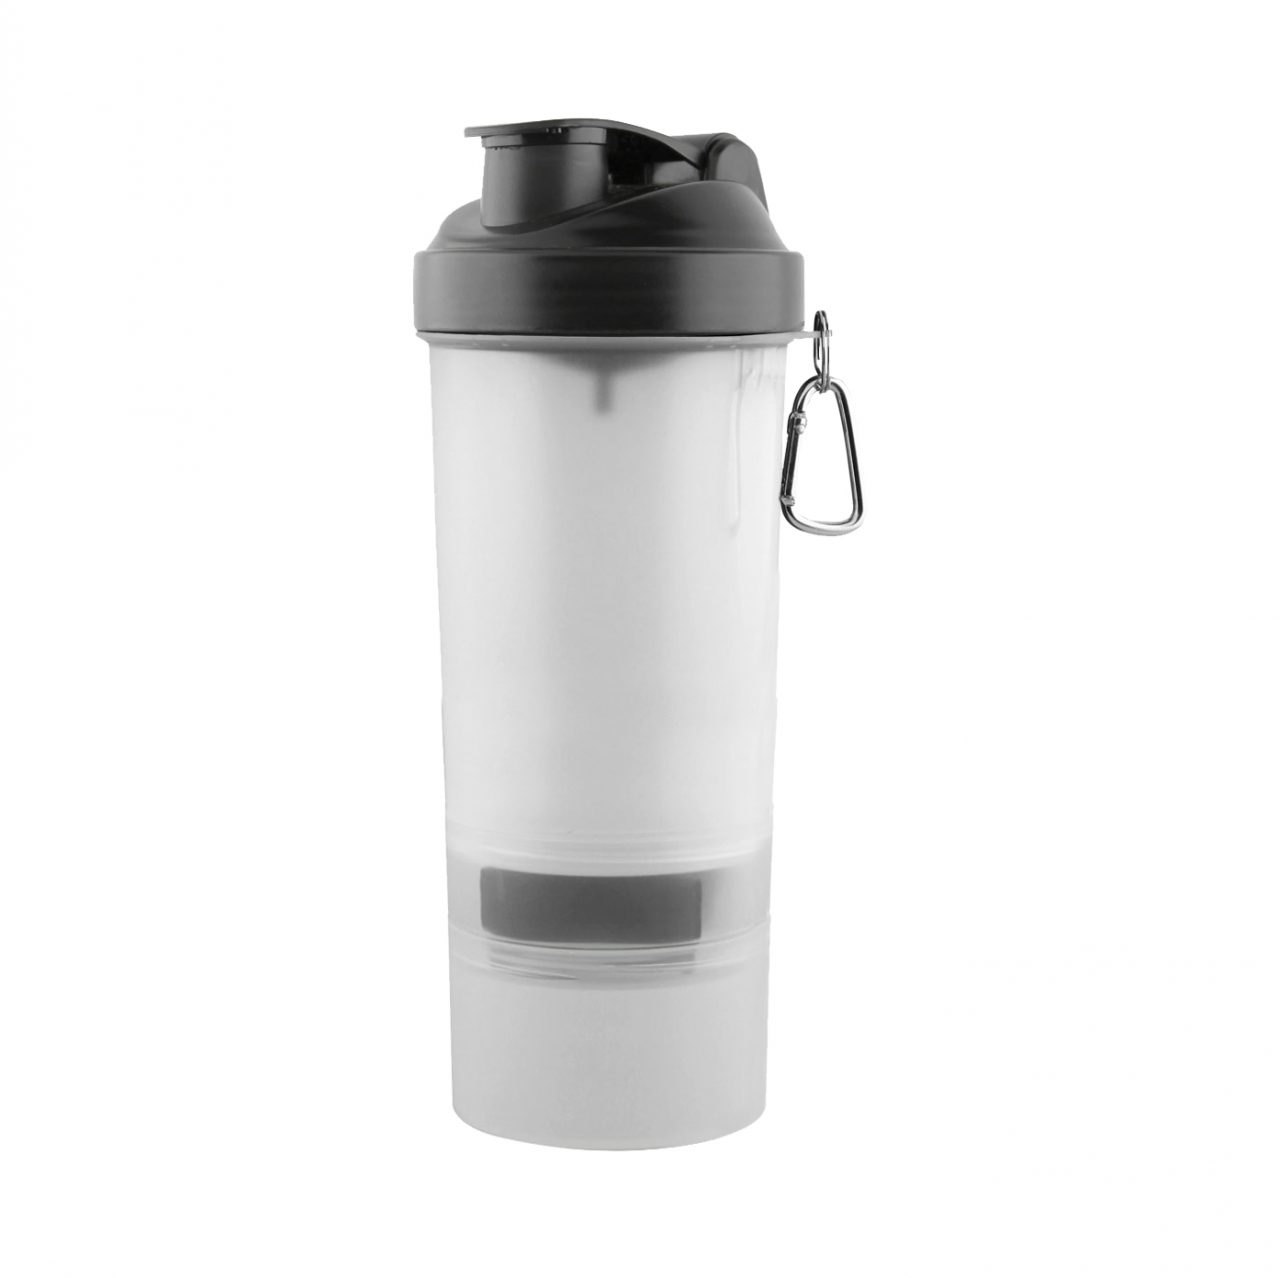 3 in 1 Shaker Cup – The Pro Shakers